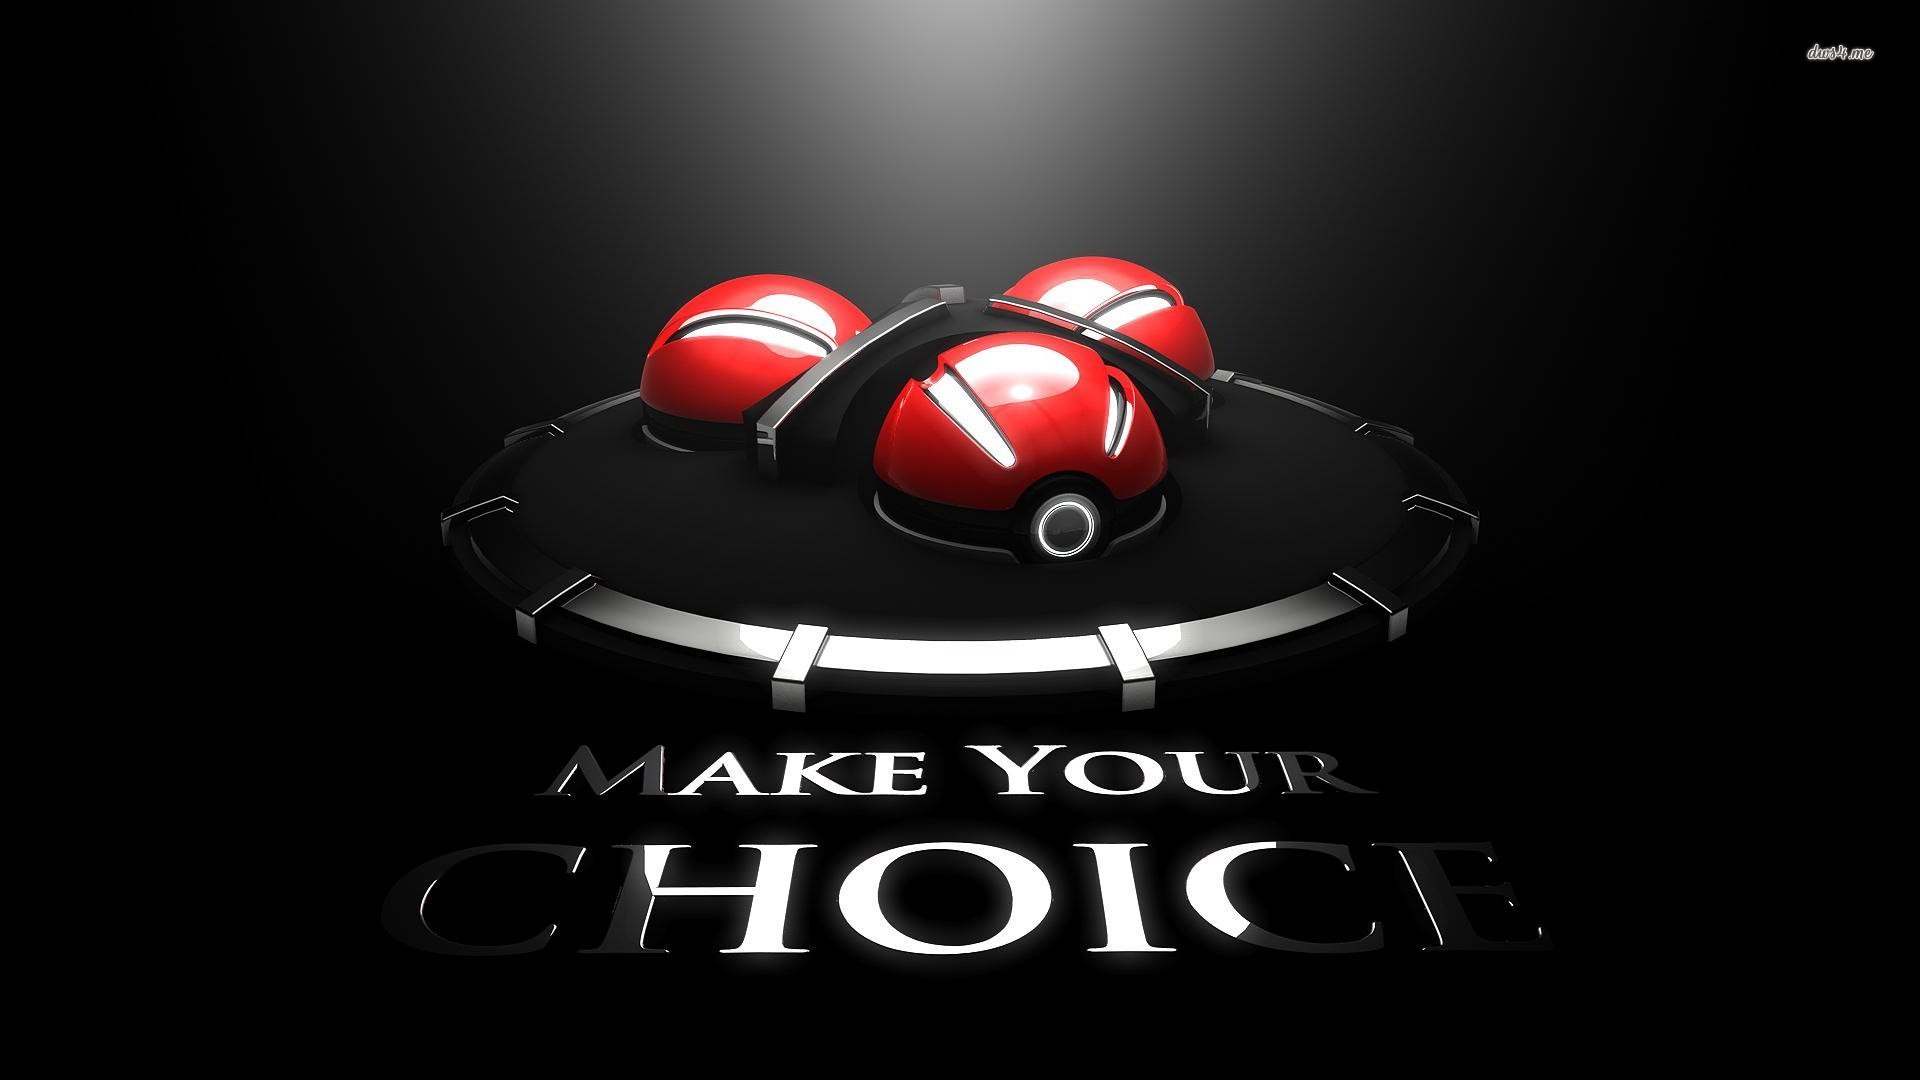 Make Your Choice Wallpaper